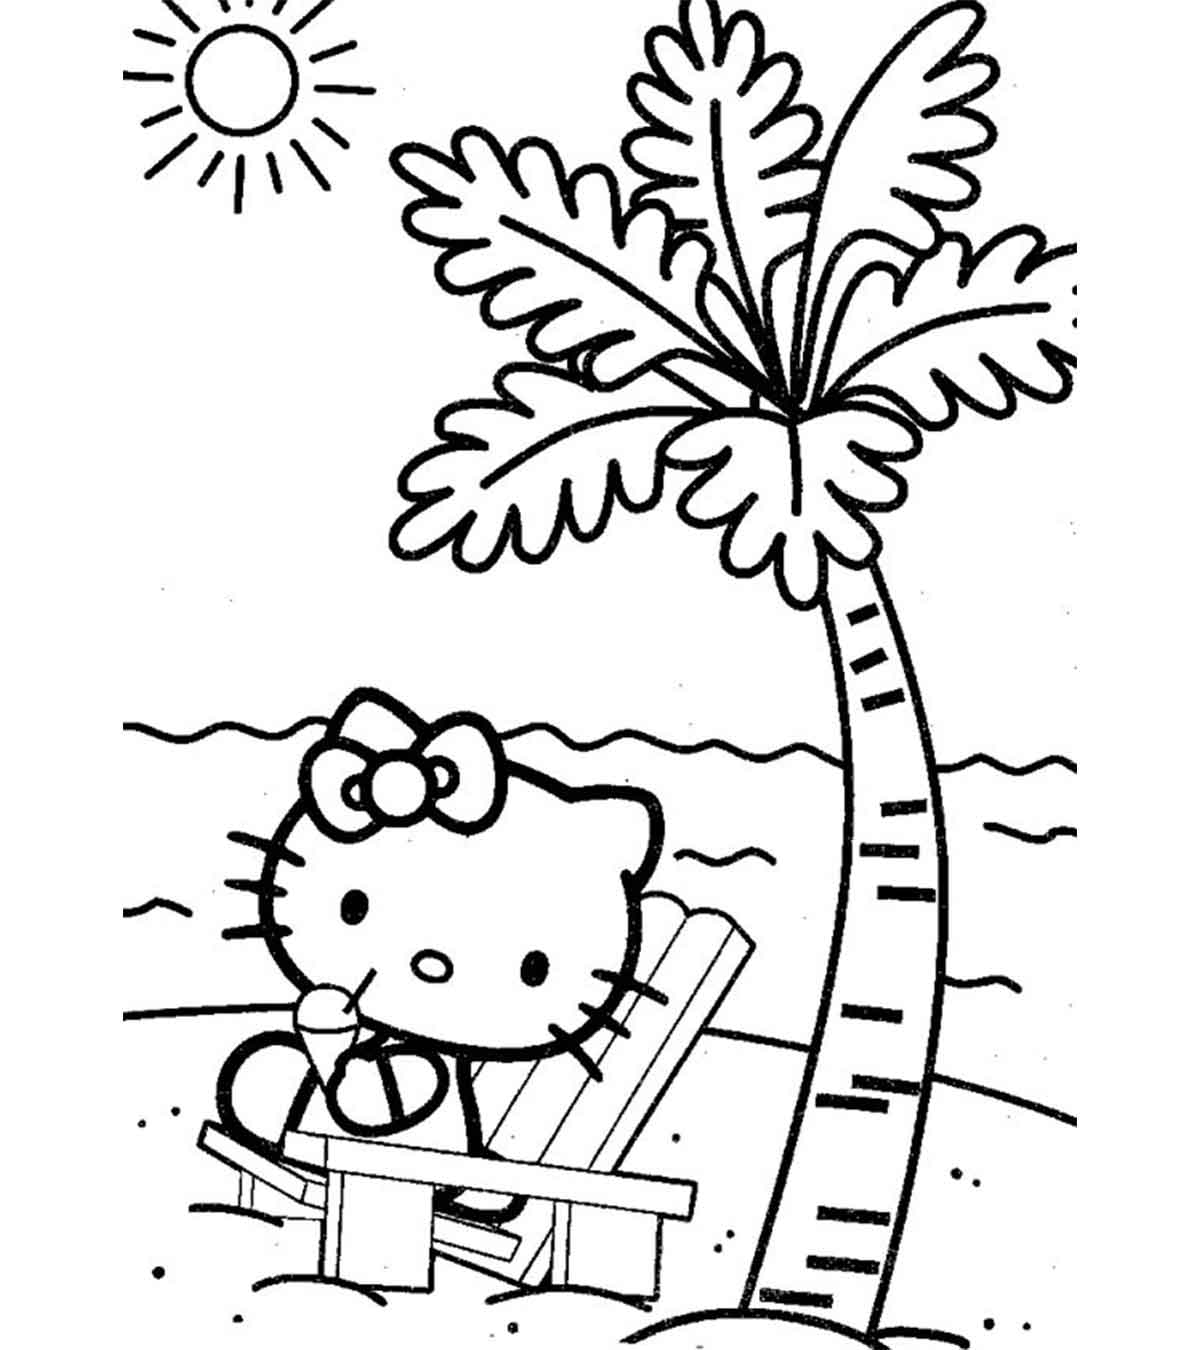 Top 20 Interesting Beach Coloring Pages For Your Little Ones_image